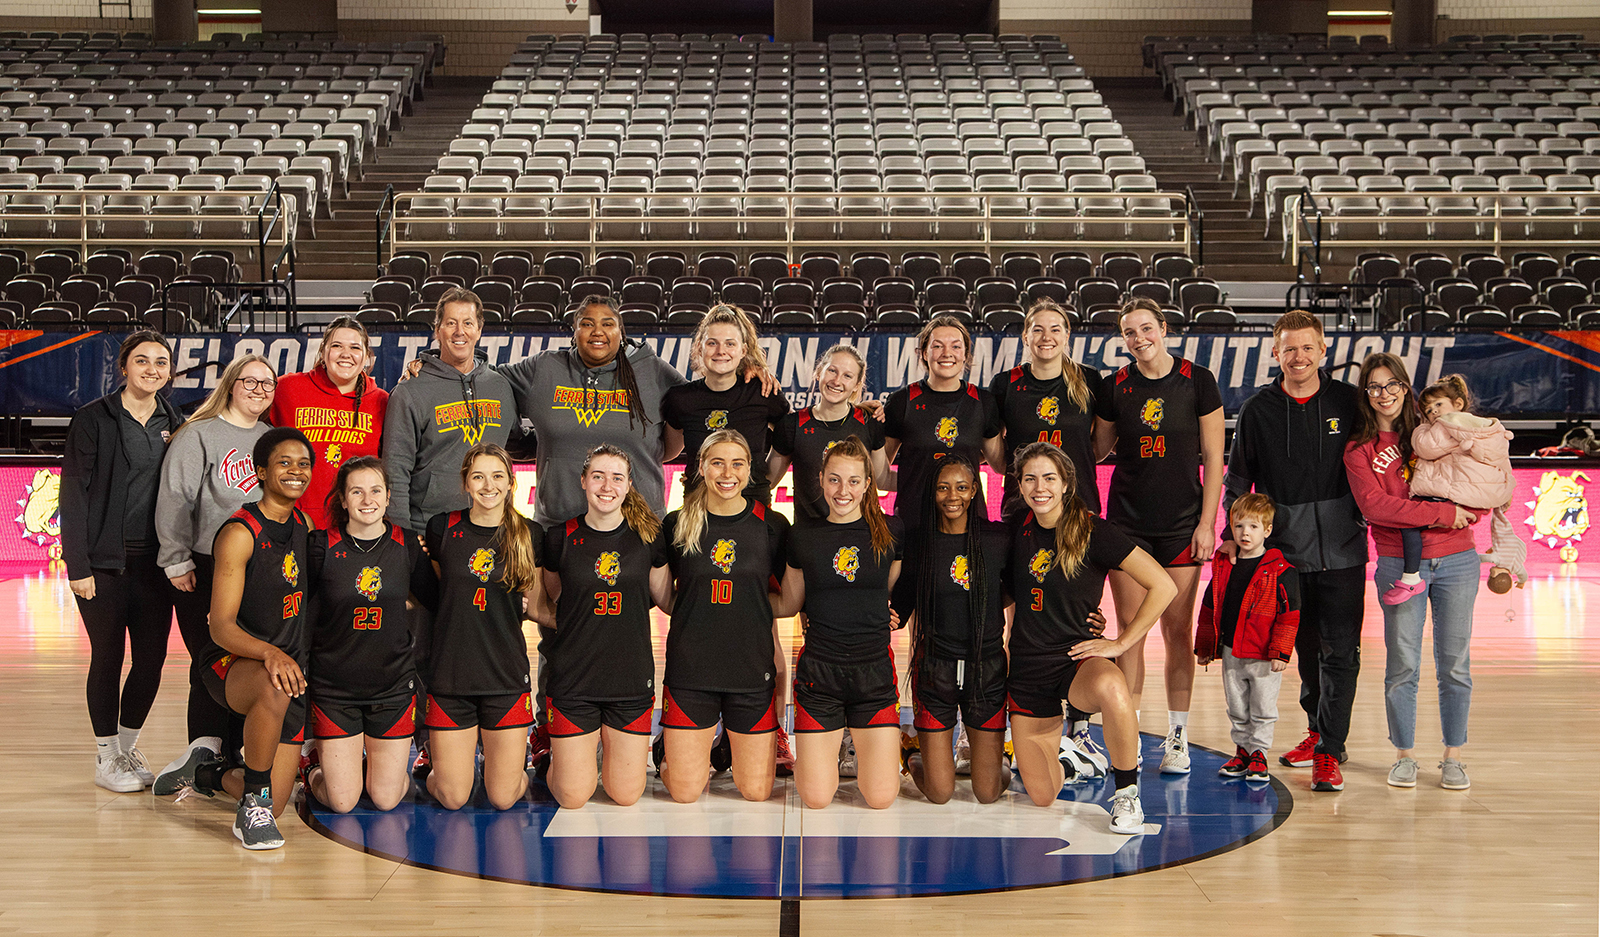 Ferris State Women’s Basketball Team Finishes Season Ranked No. 3 in the Nation in Coaches Poll